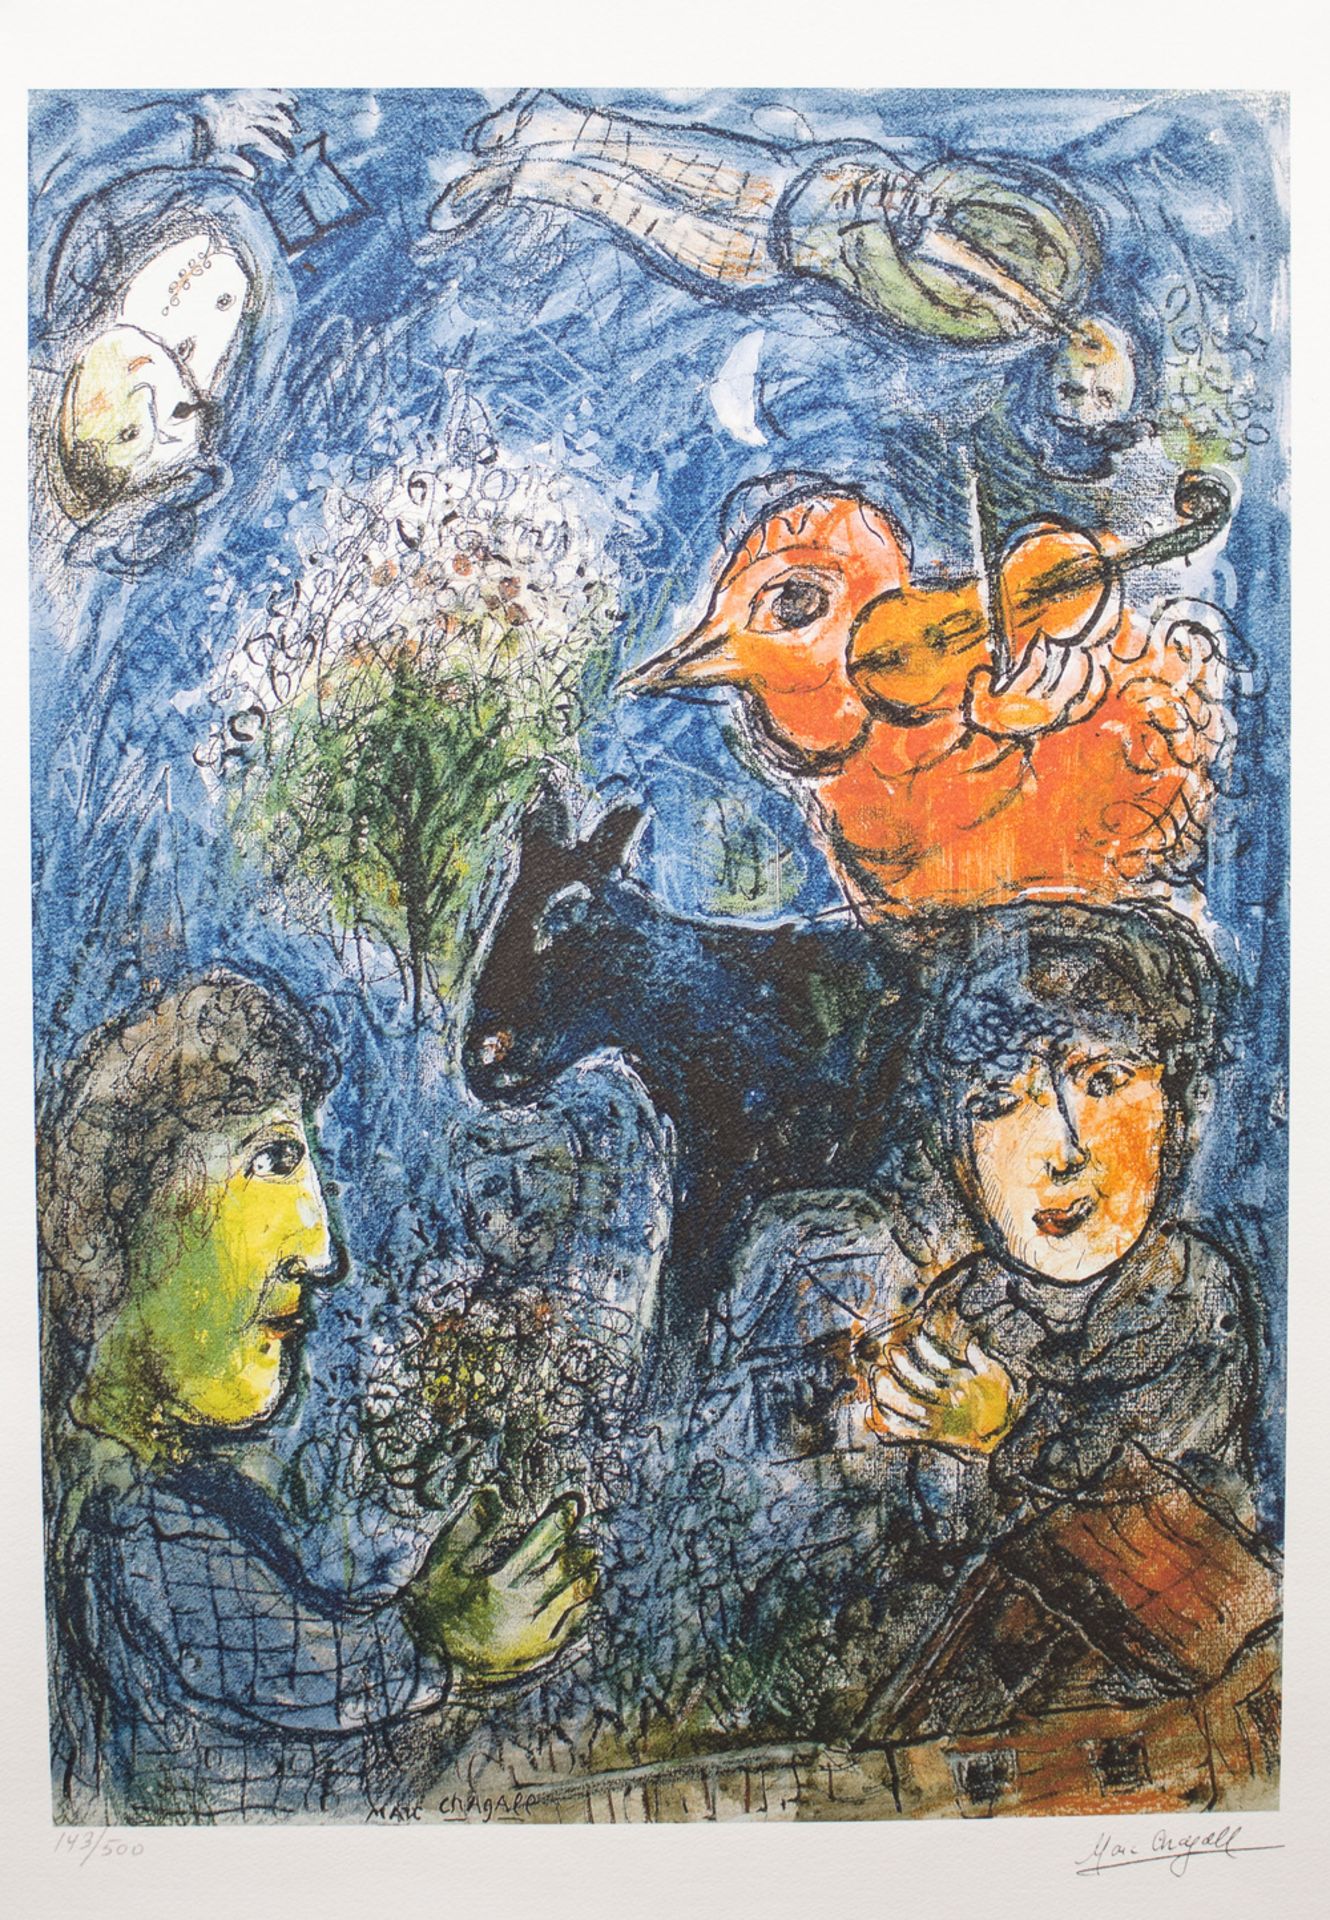 Marc CHAGALL (1887-1985), 'Ohne Titel' / 'Without title'